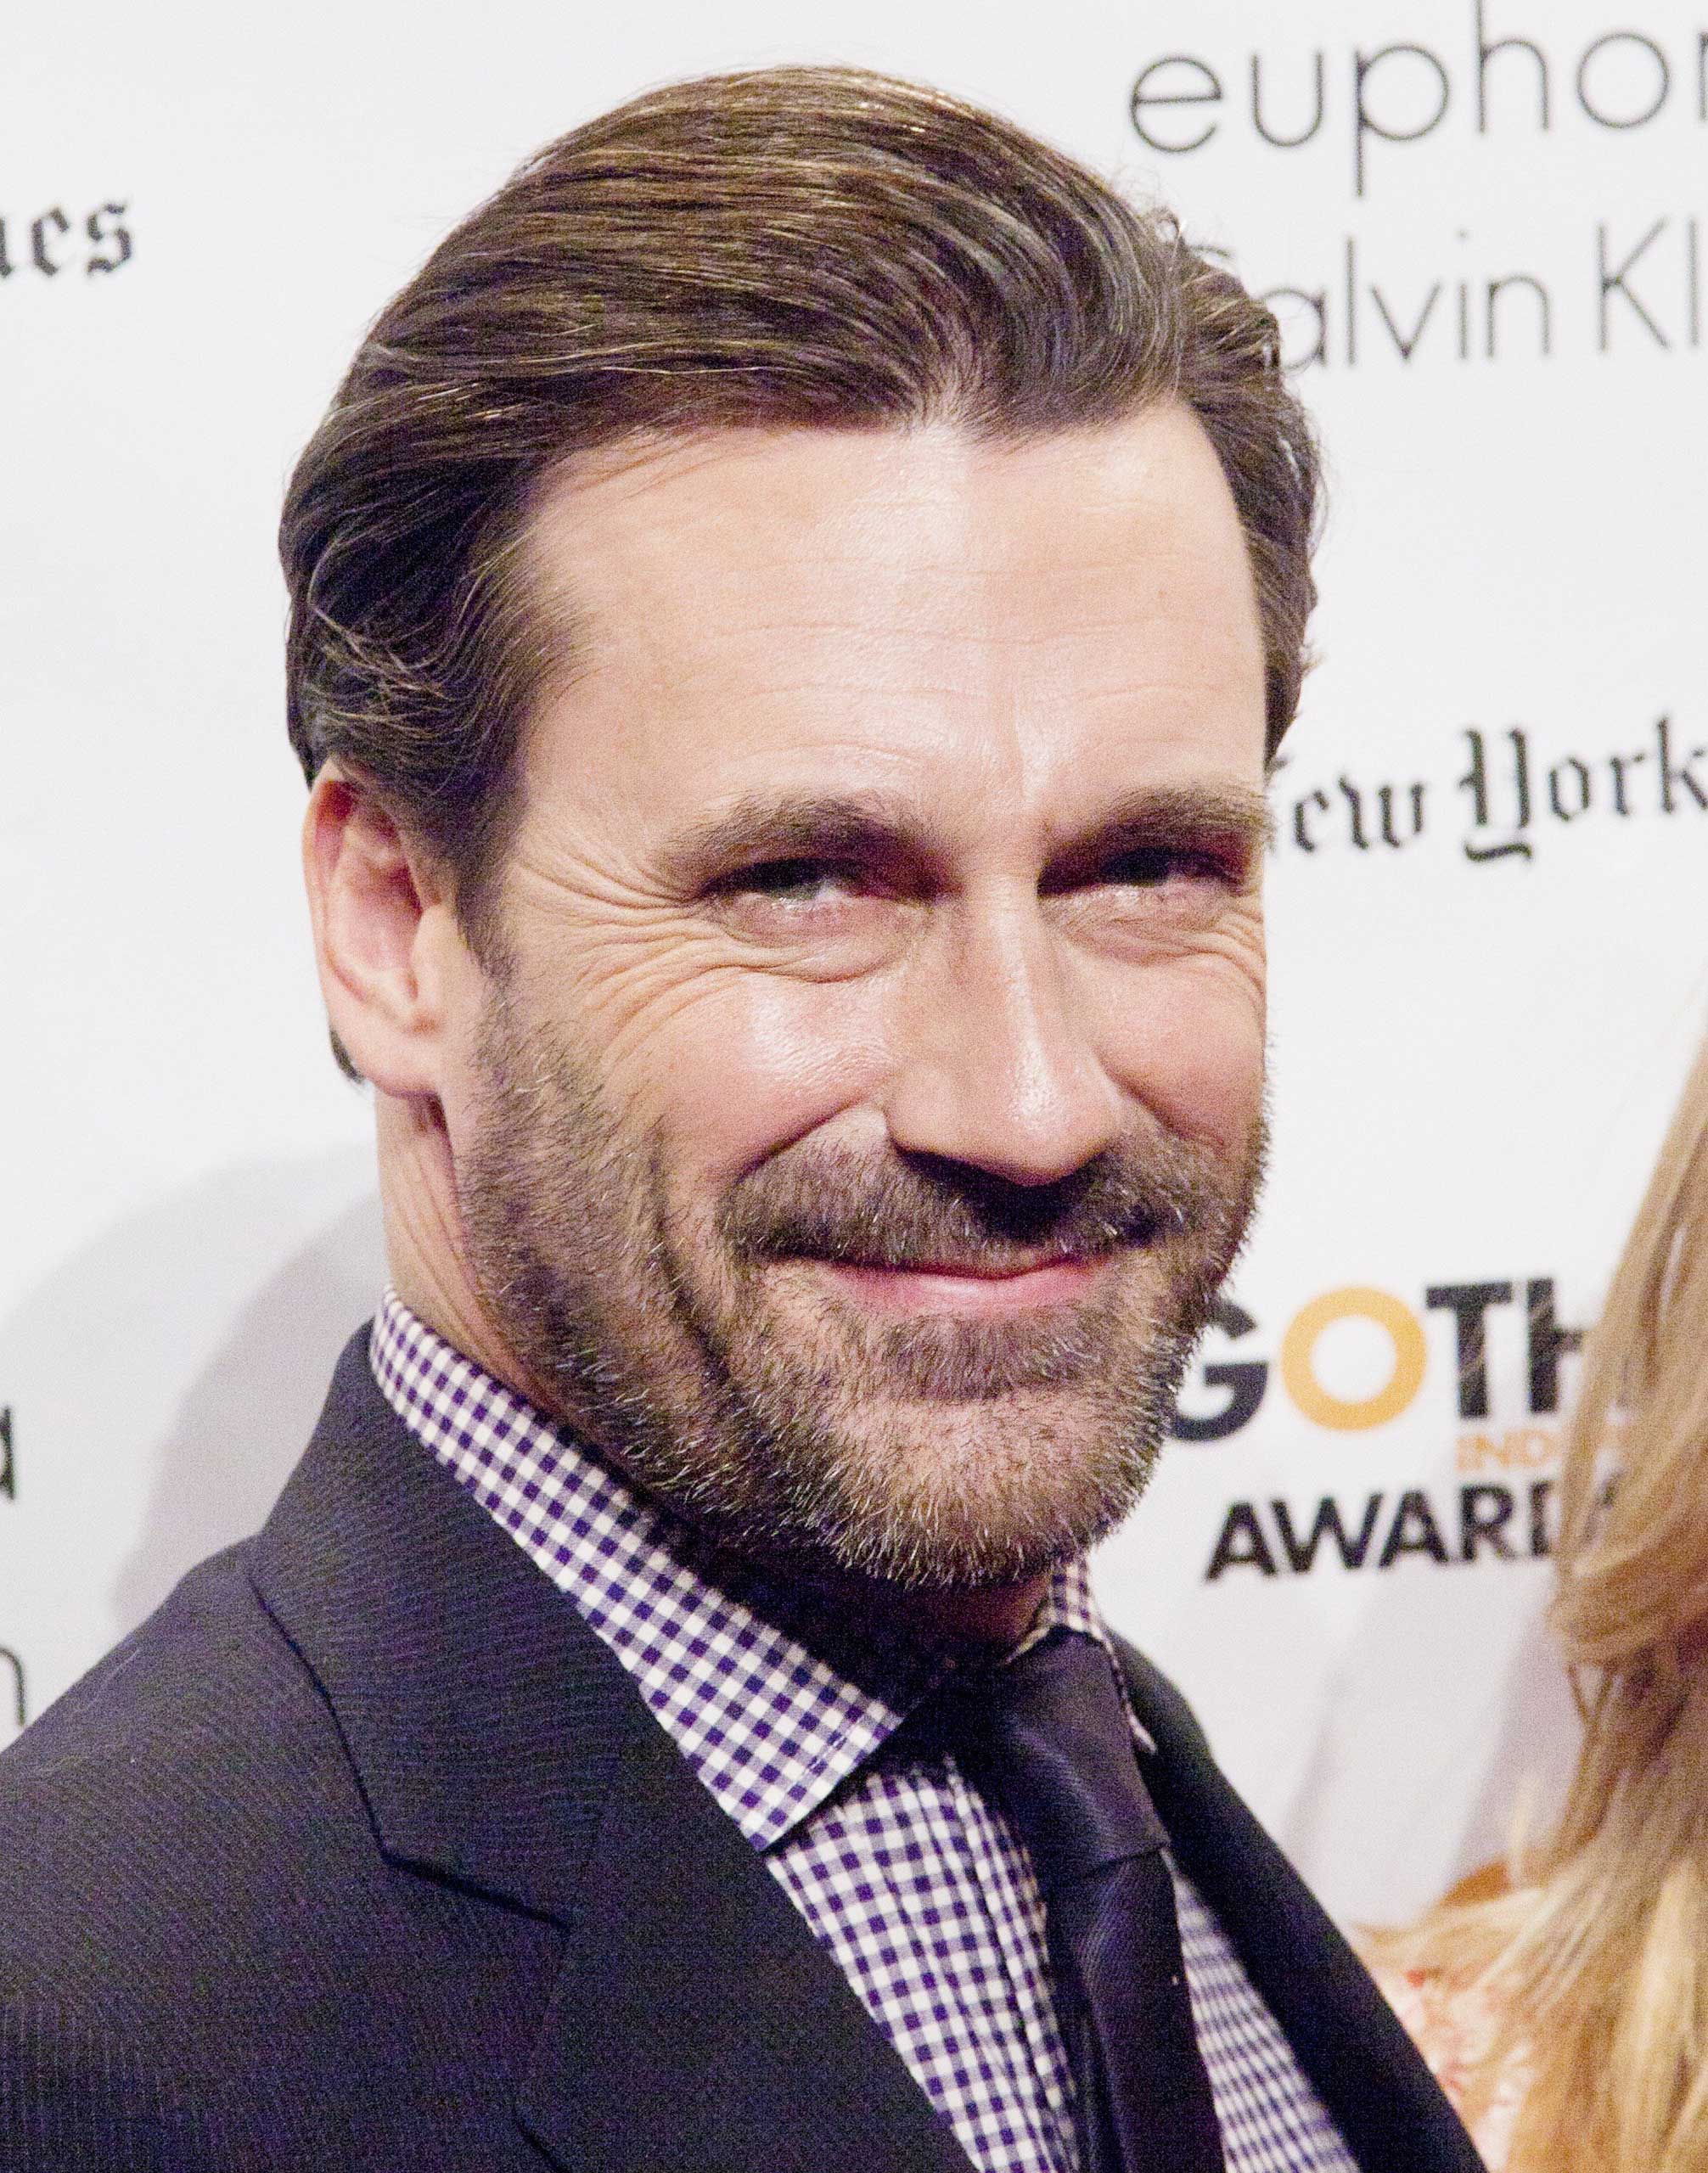 Jon Hamm attends "The 24th Annual Gotham Independent Film Awards" at Cipriani Wall Street in New York City on Dec. 1, 2014. (LAN/Corbis)